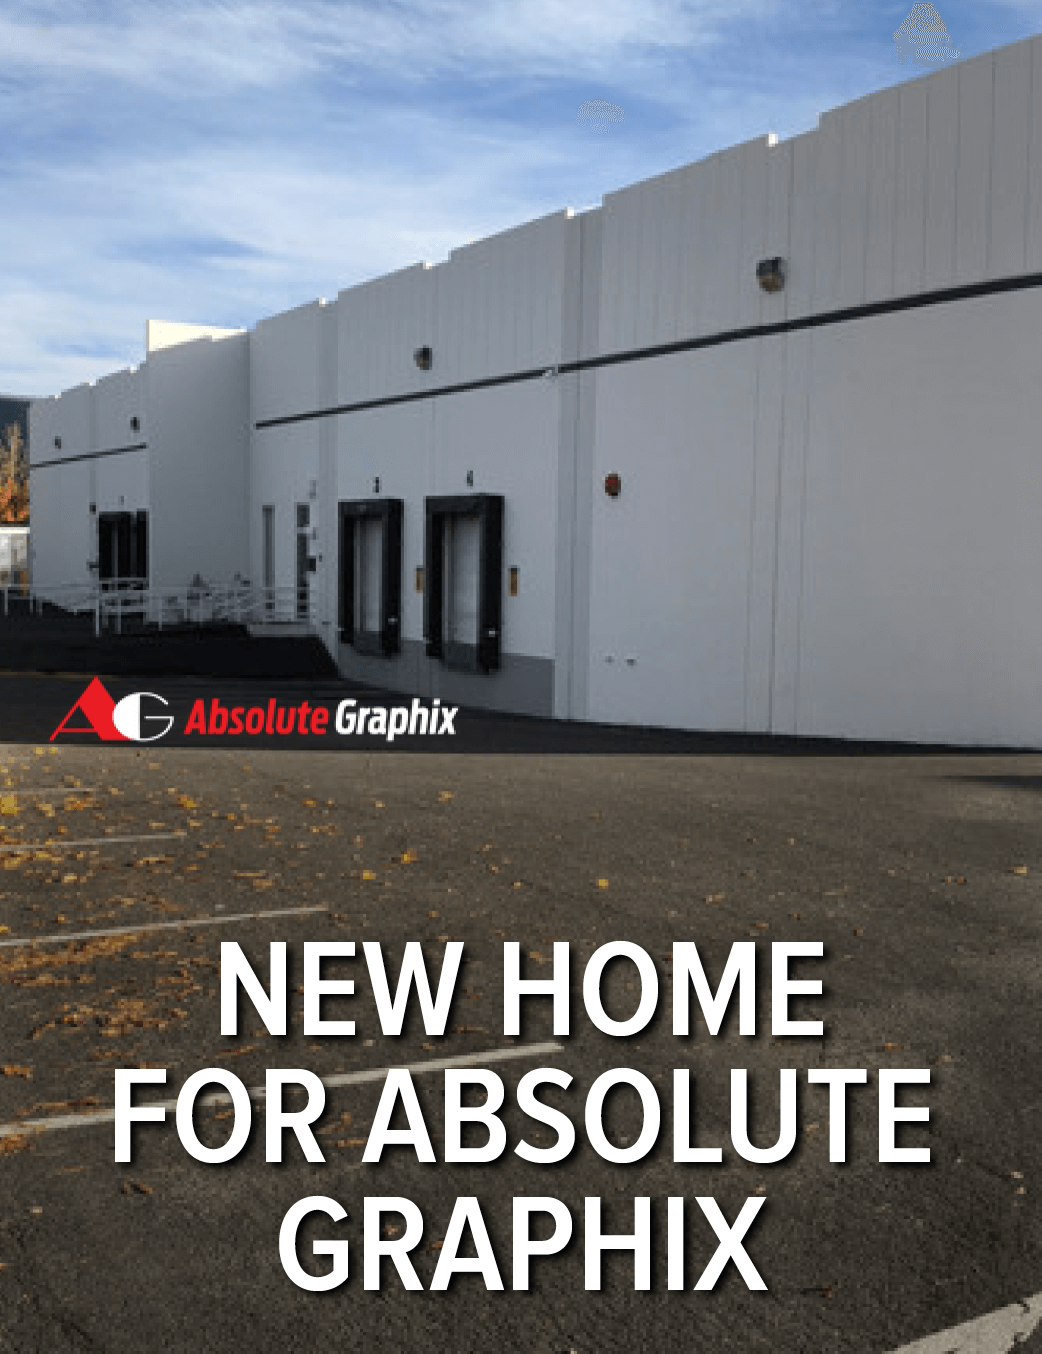 RM&D Secures New Home for Absolute Graphix. Quickly and Smoothly!